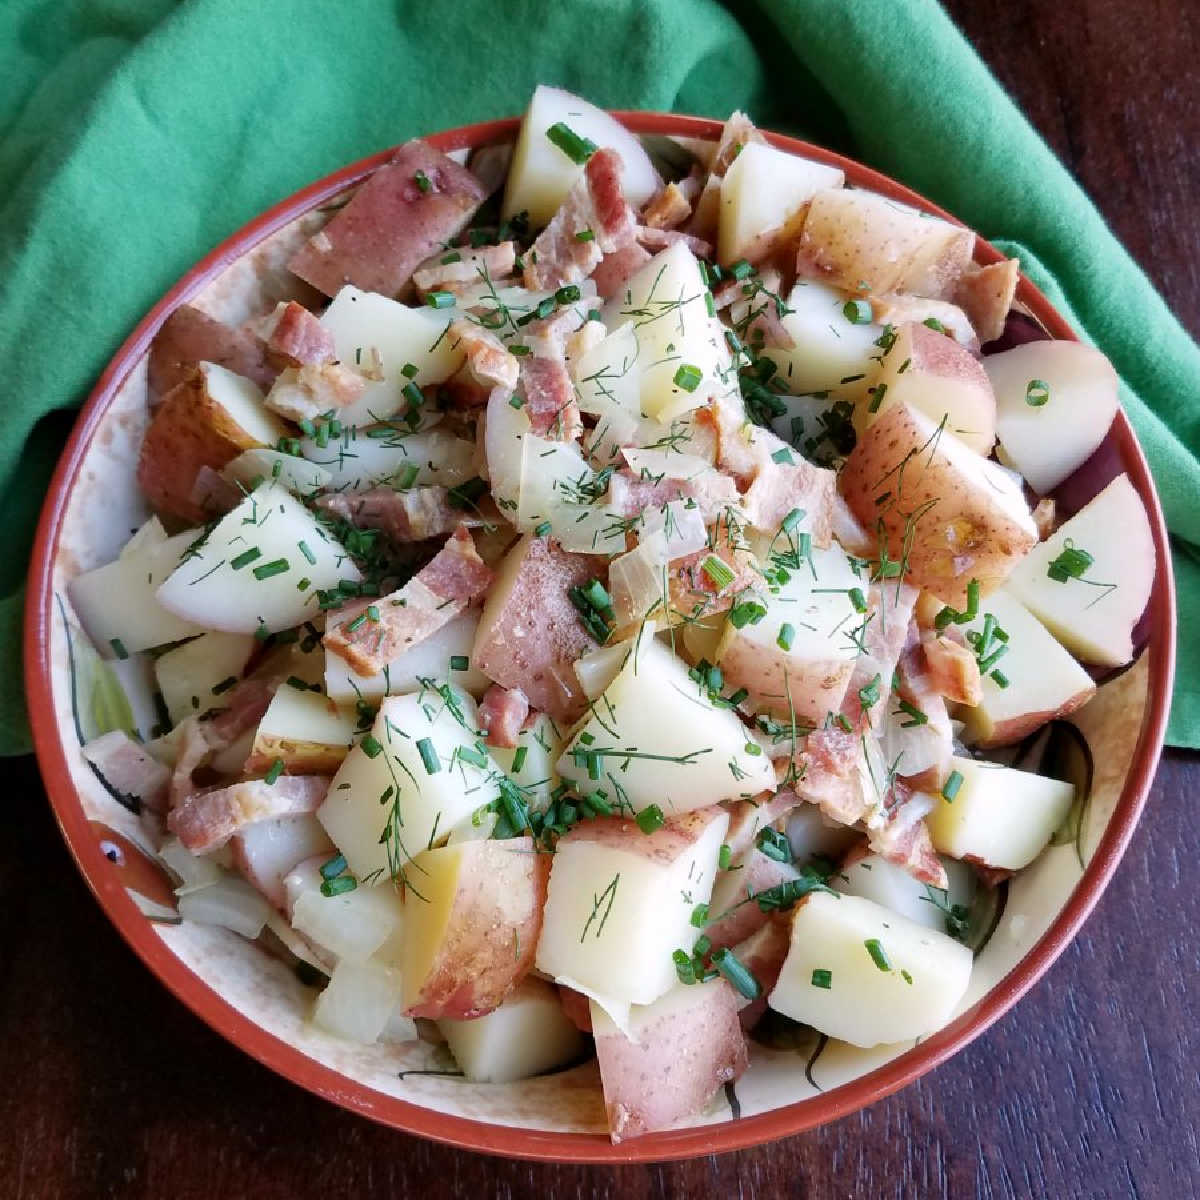 Large serving bowl filled with German potato salad with chunks of red potatoes, bacon, chives, and dill.